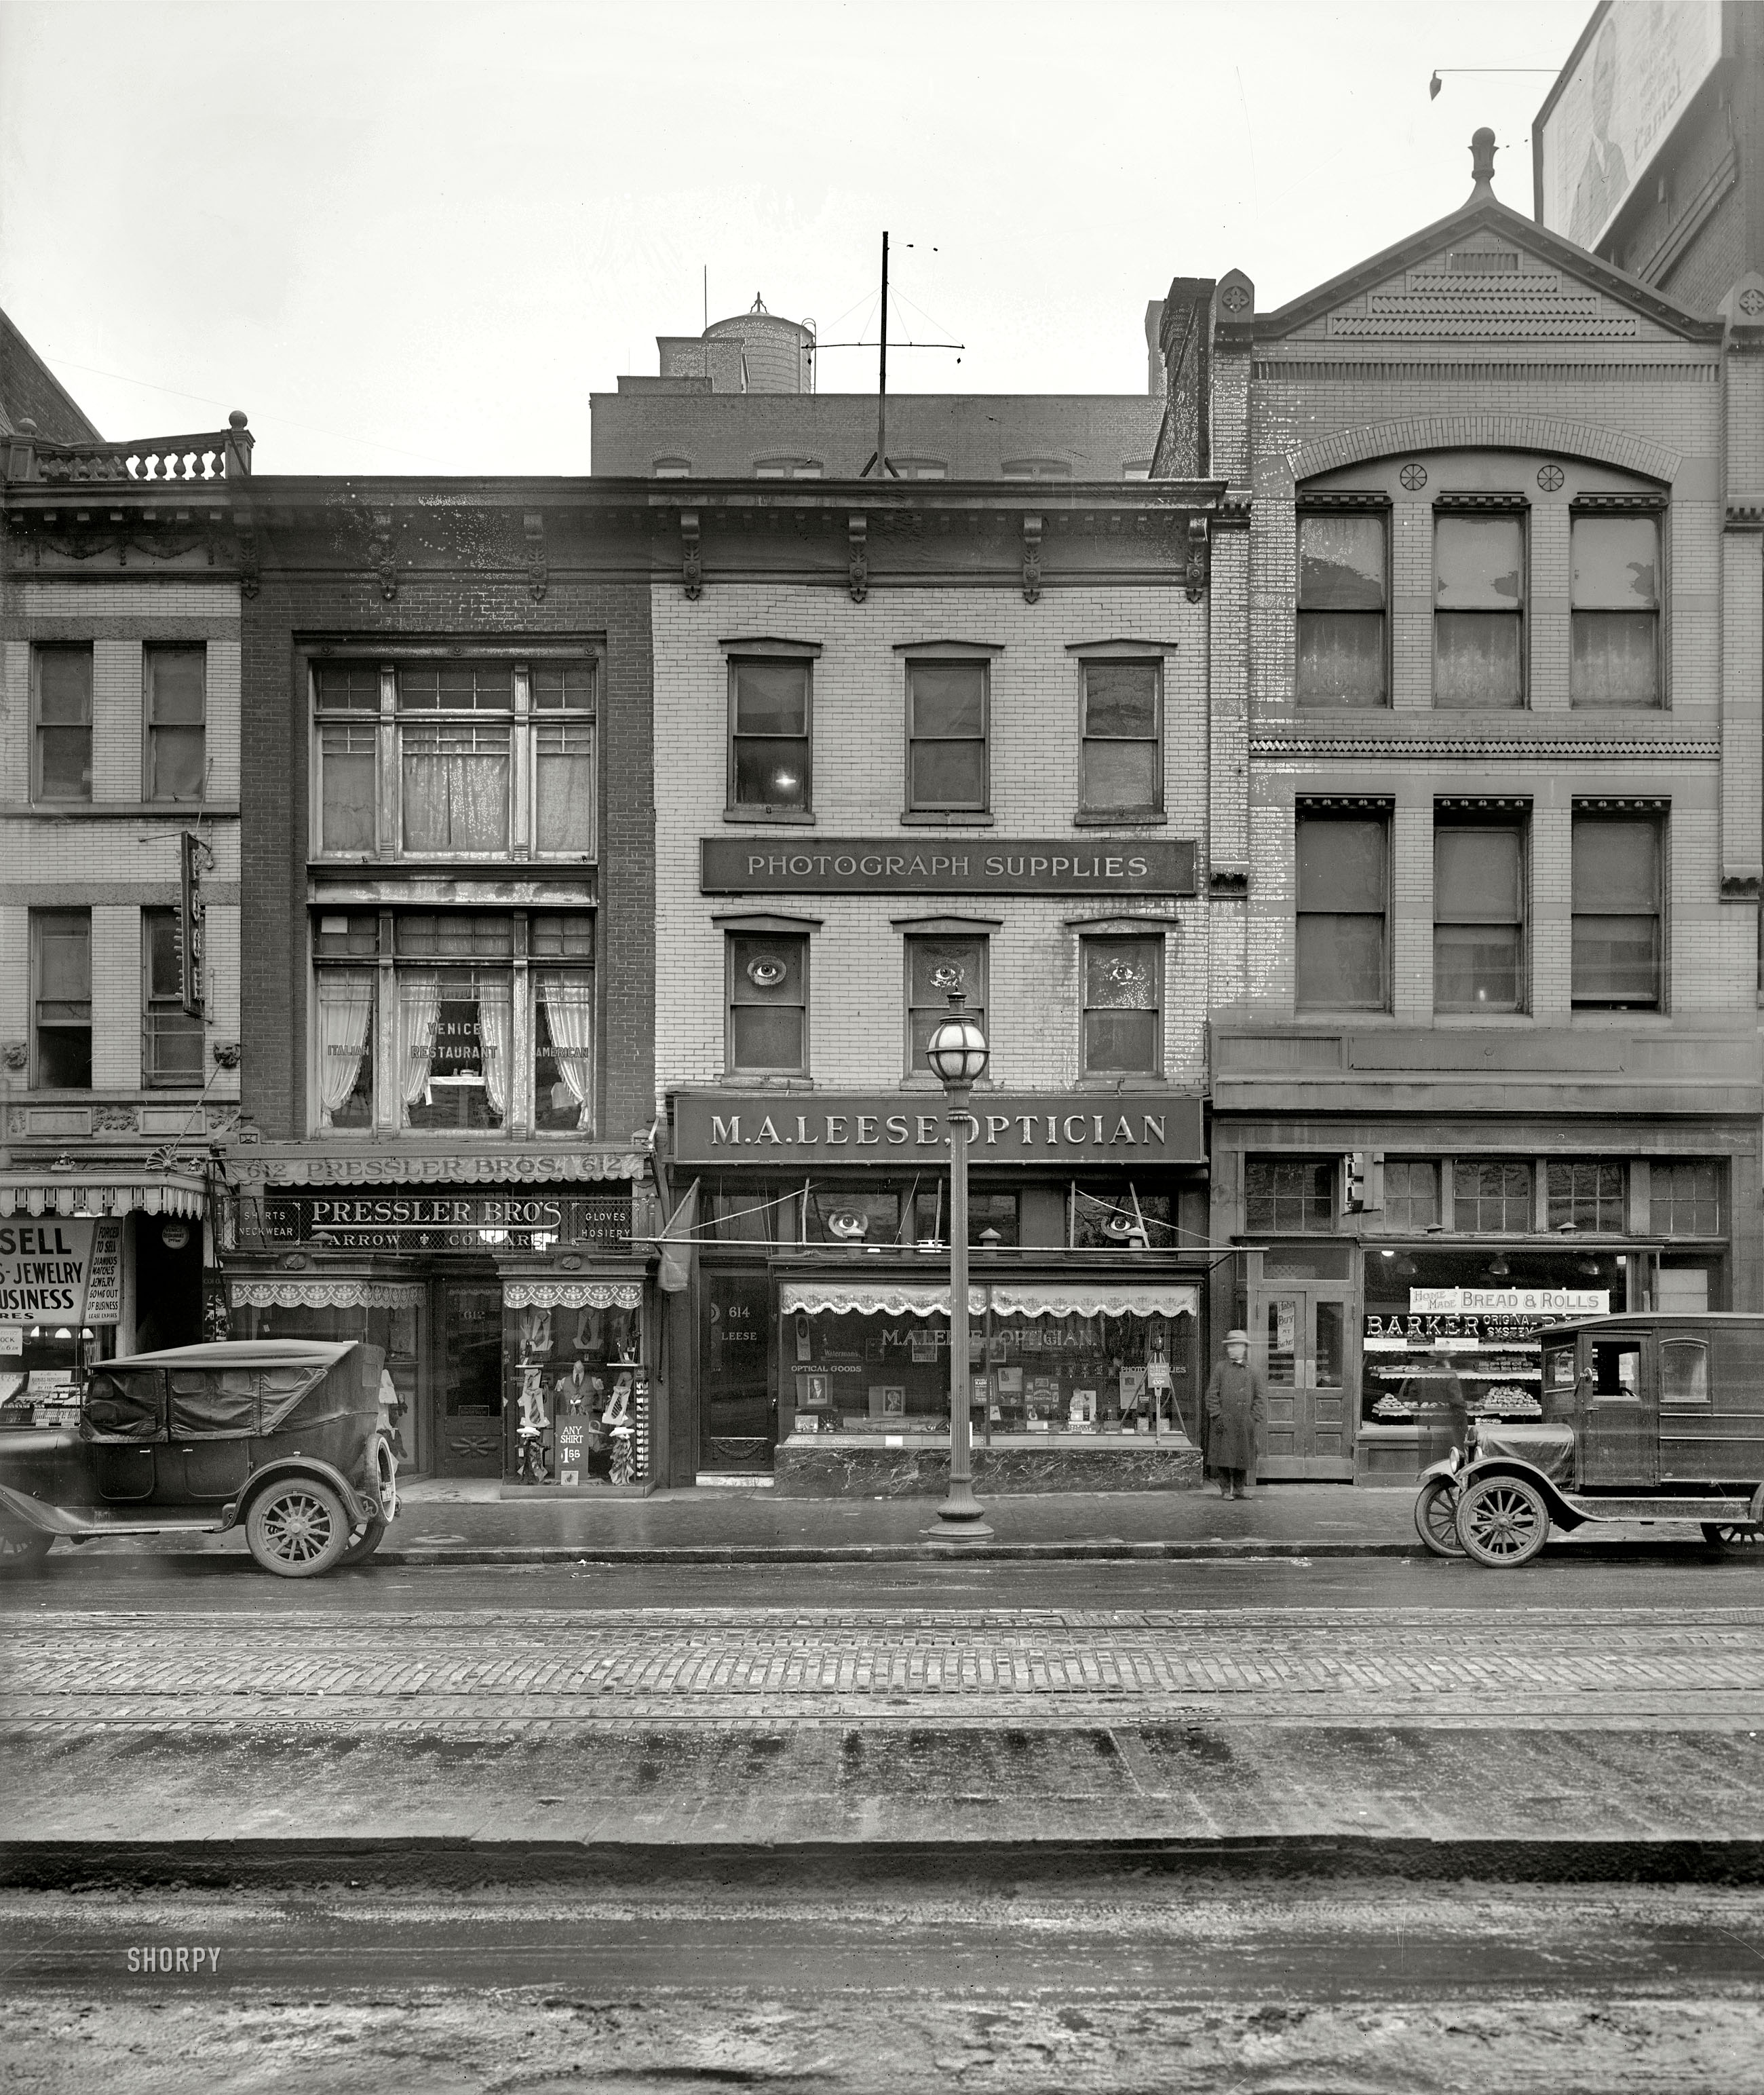 Washington, D.C., circa 1926. "M.A. Leese Optician, 9th Street store." Other businesses represented in this mold-spotted street view include a pool hall, Venice Italian American Restaurant, Pressler Bros. haberdashery and Barker "Original System" Bakery. National Photo Company glass negative. View full size.